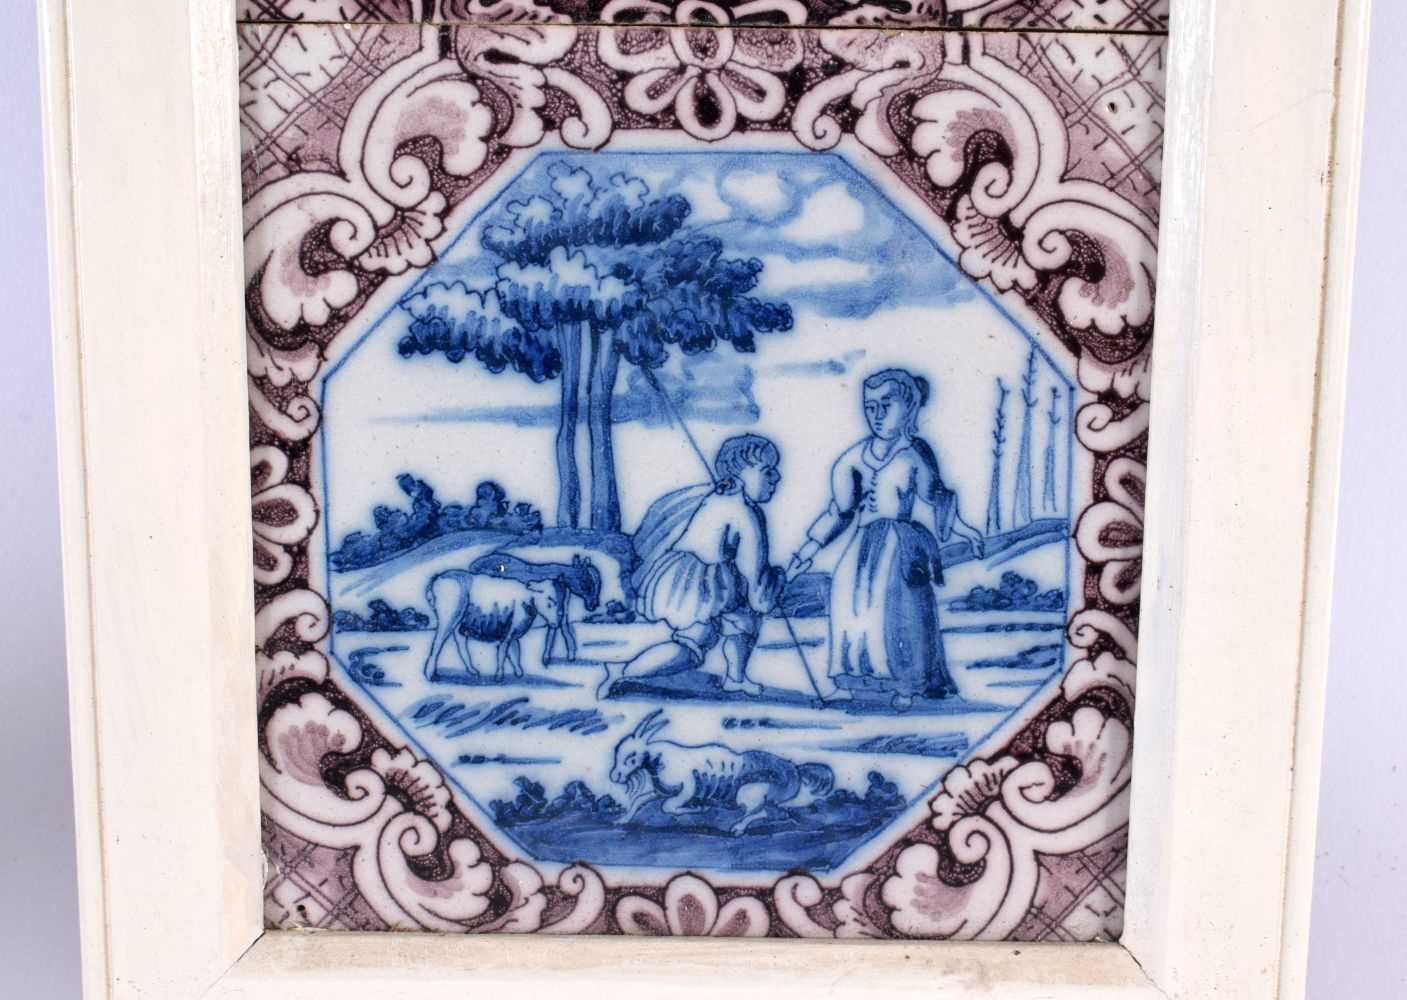 A SET OF THREE 18TH CENTURY DUTCH DELFT MANGANESE BLUE AND WHITE TILES. 42 cm x 15 cm. - Image 4 of 5